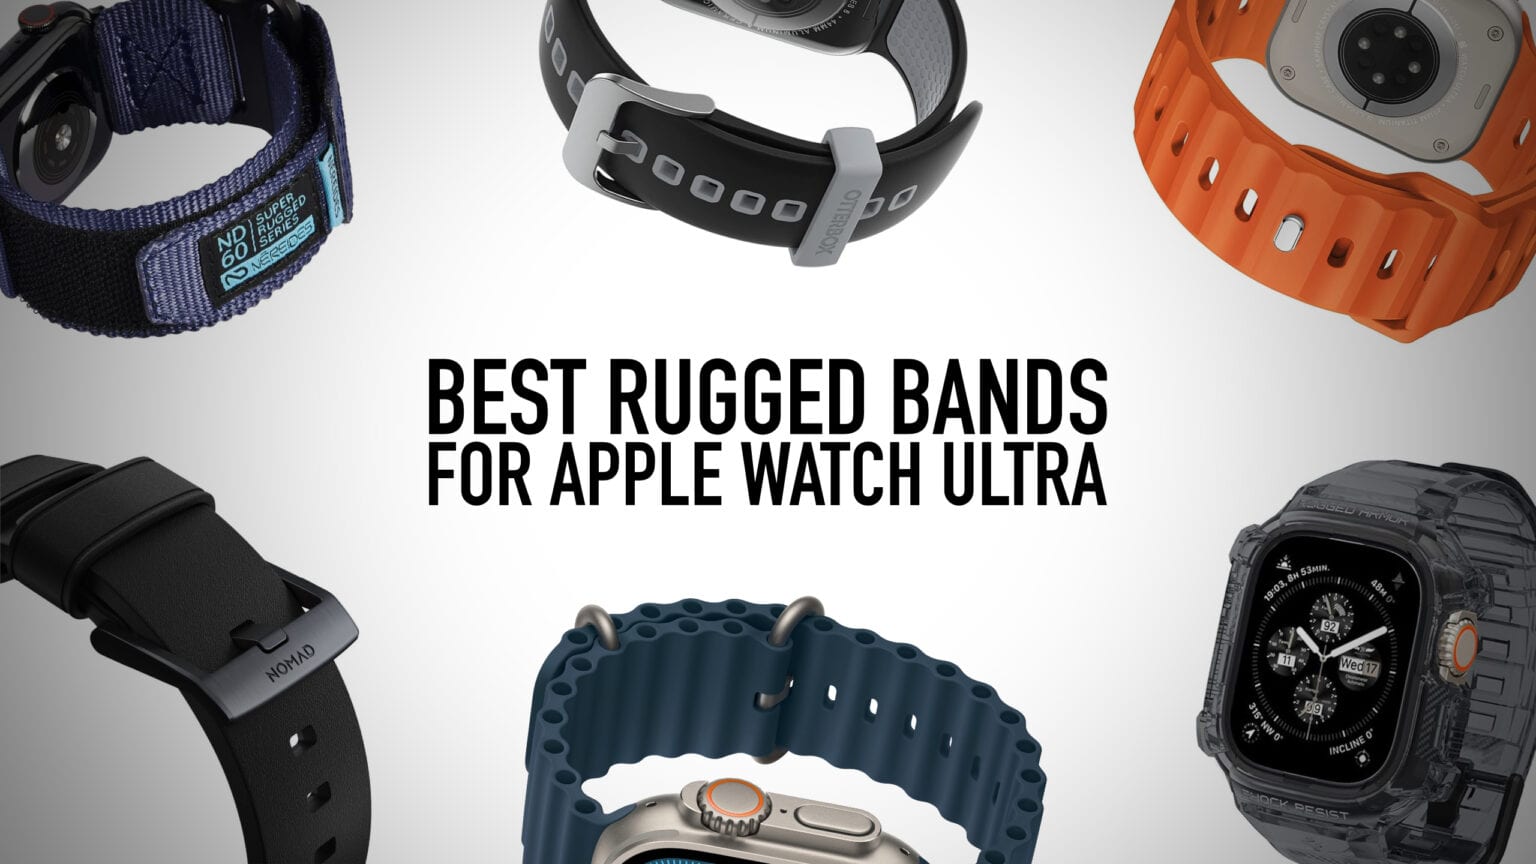 These are the best rugged bands for Apple Watch Ultra